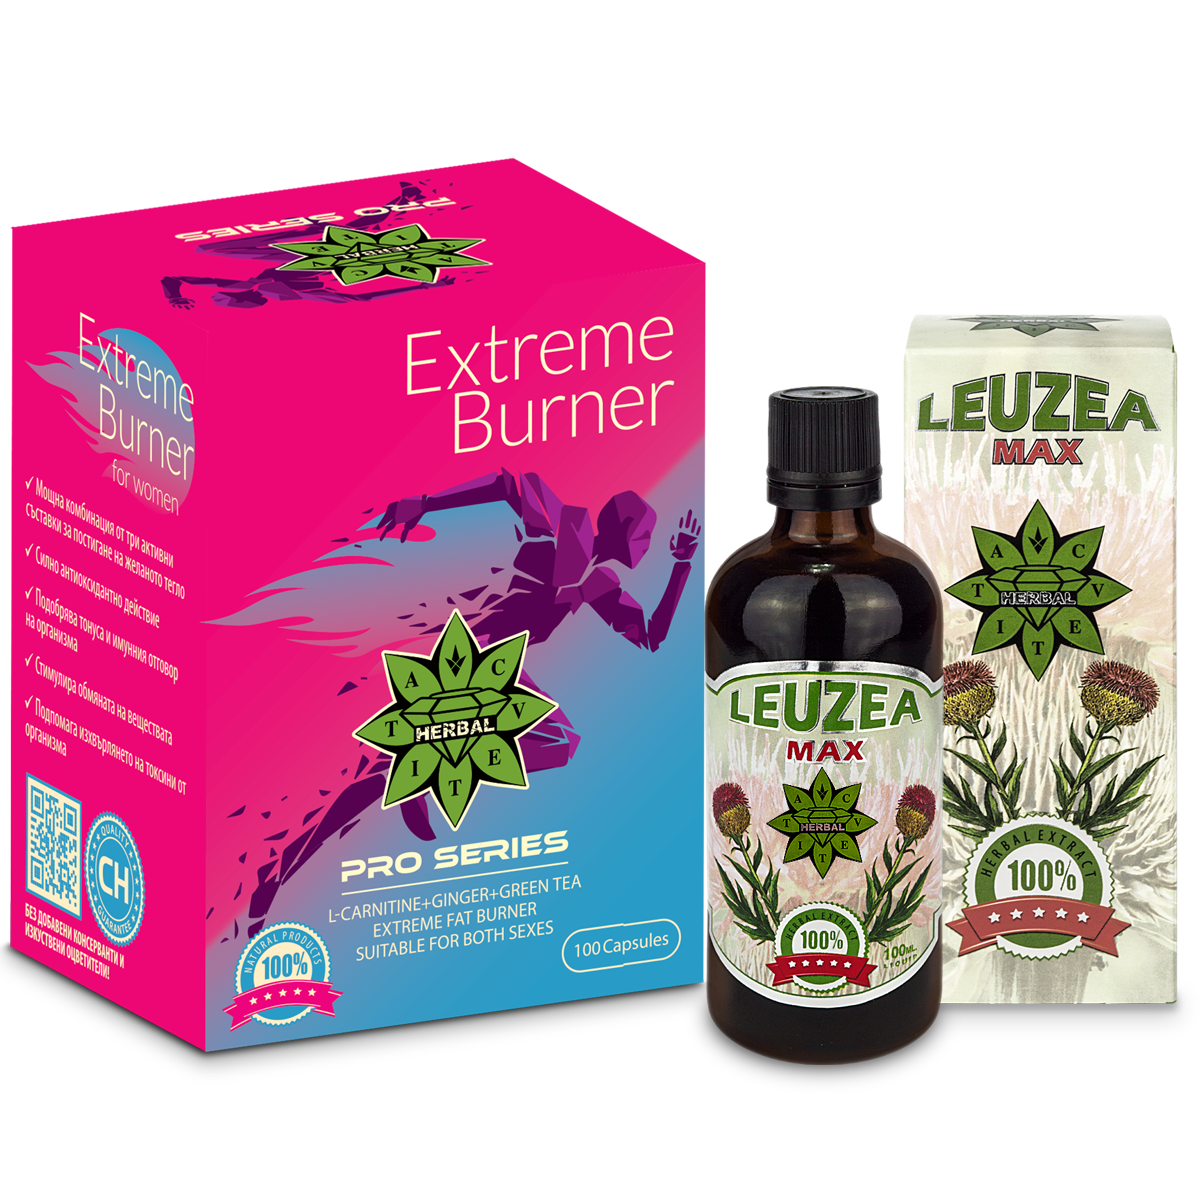 Leuzea + Extreme Burner 100 capsules - Muscle Growth, Weight Loss, Fat Burner - $73.08